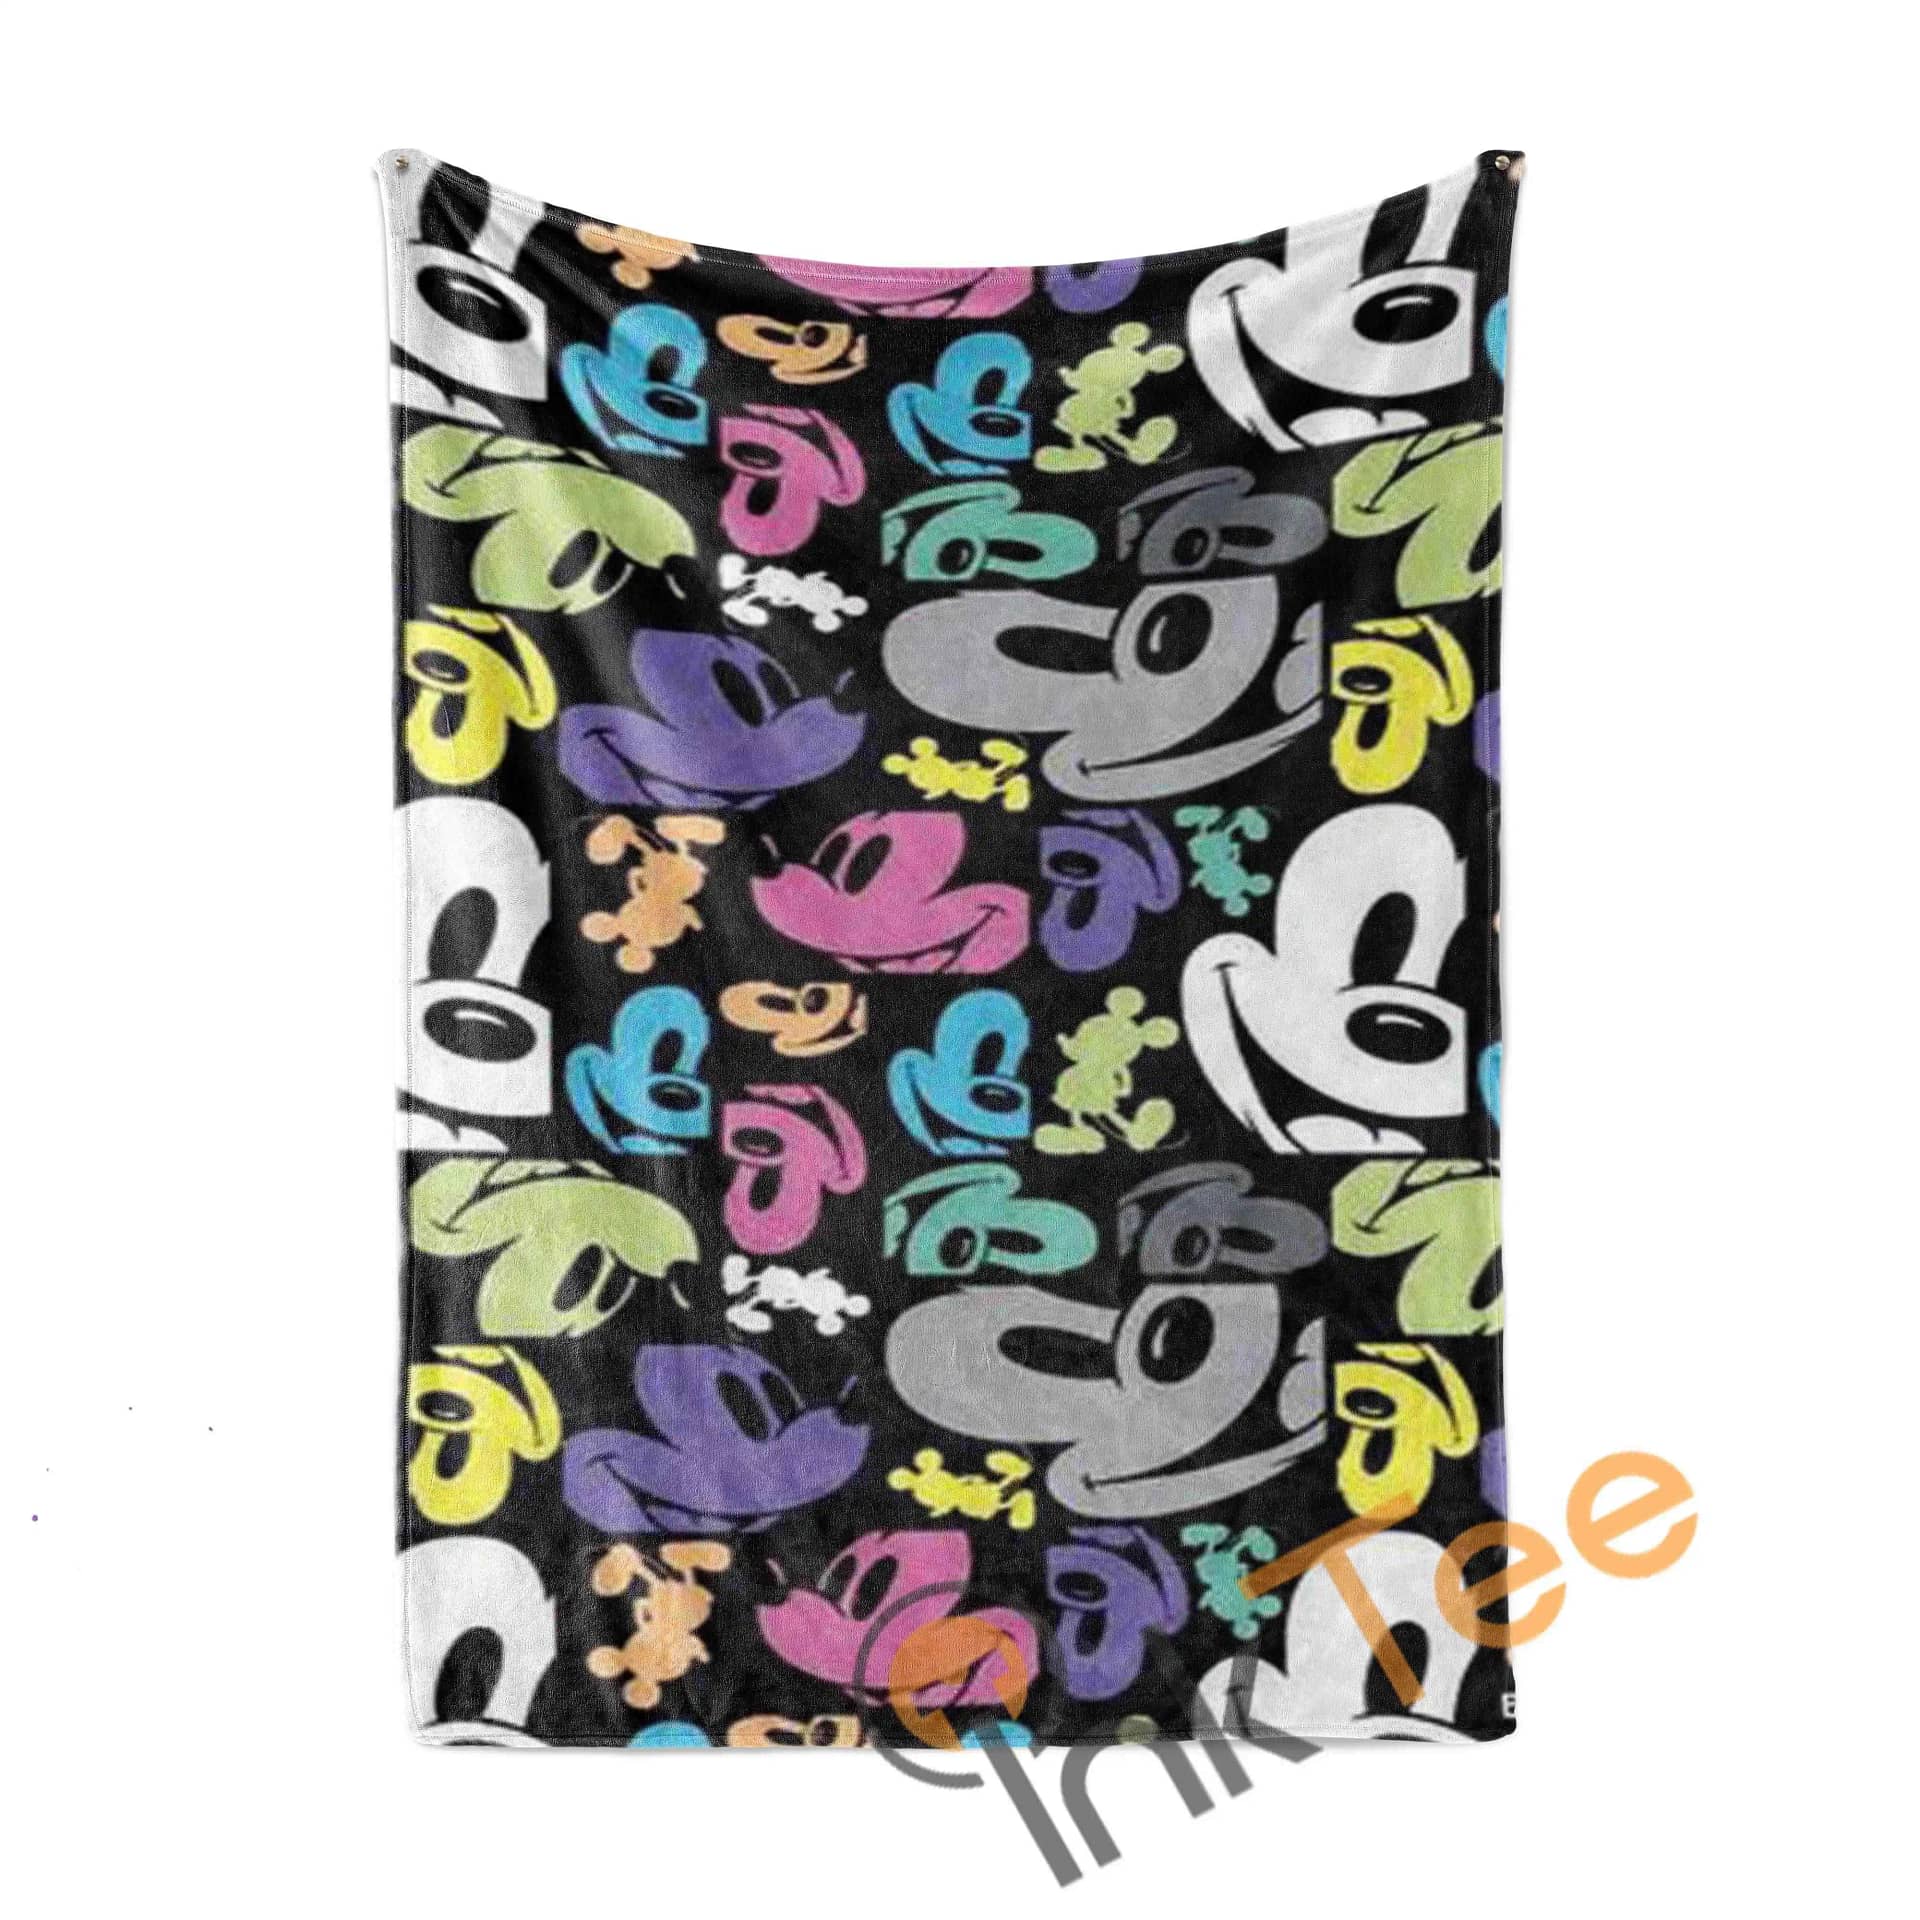 Colorful Mickey Mouse Limited Edition Amazon Best Seller Sku 4087 Fleece Blanket